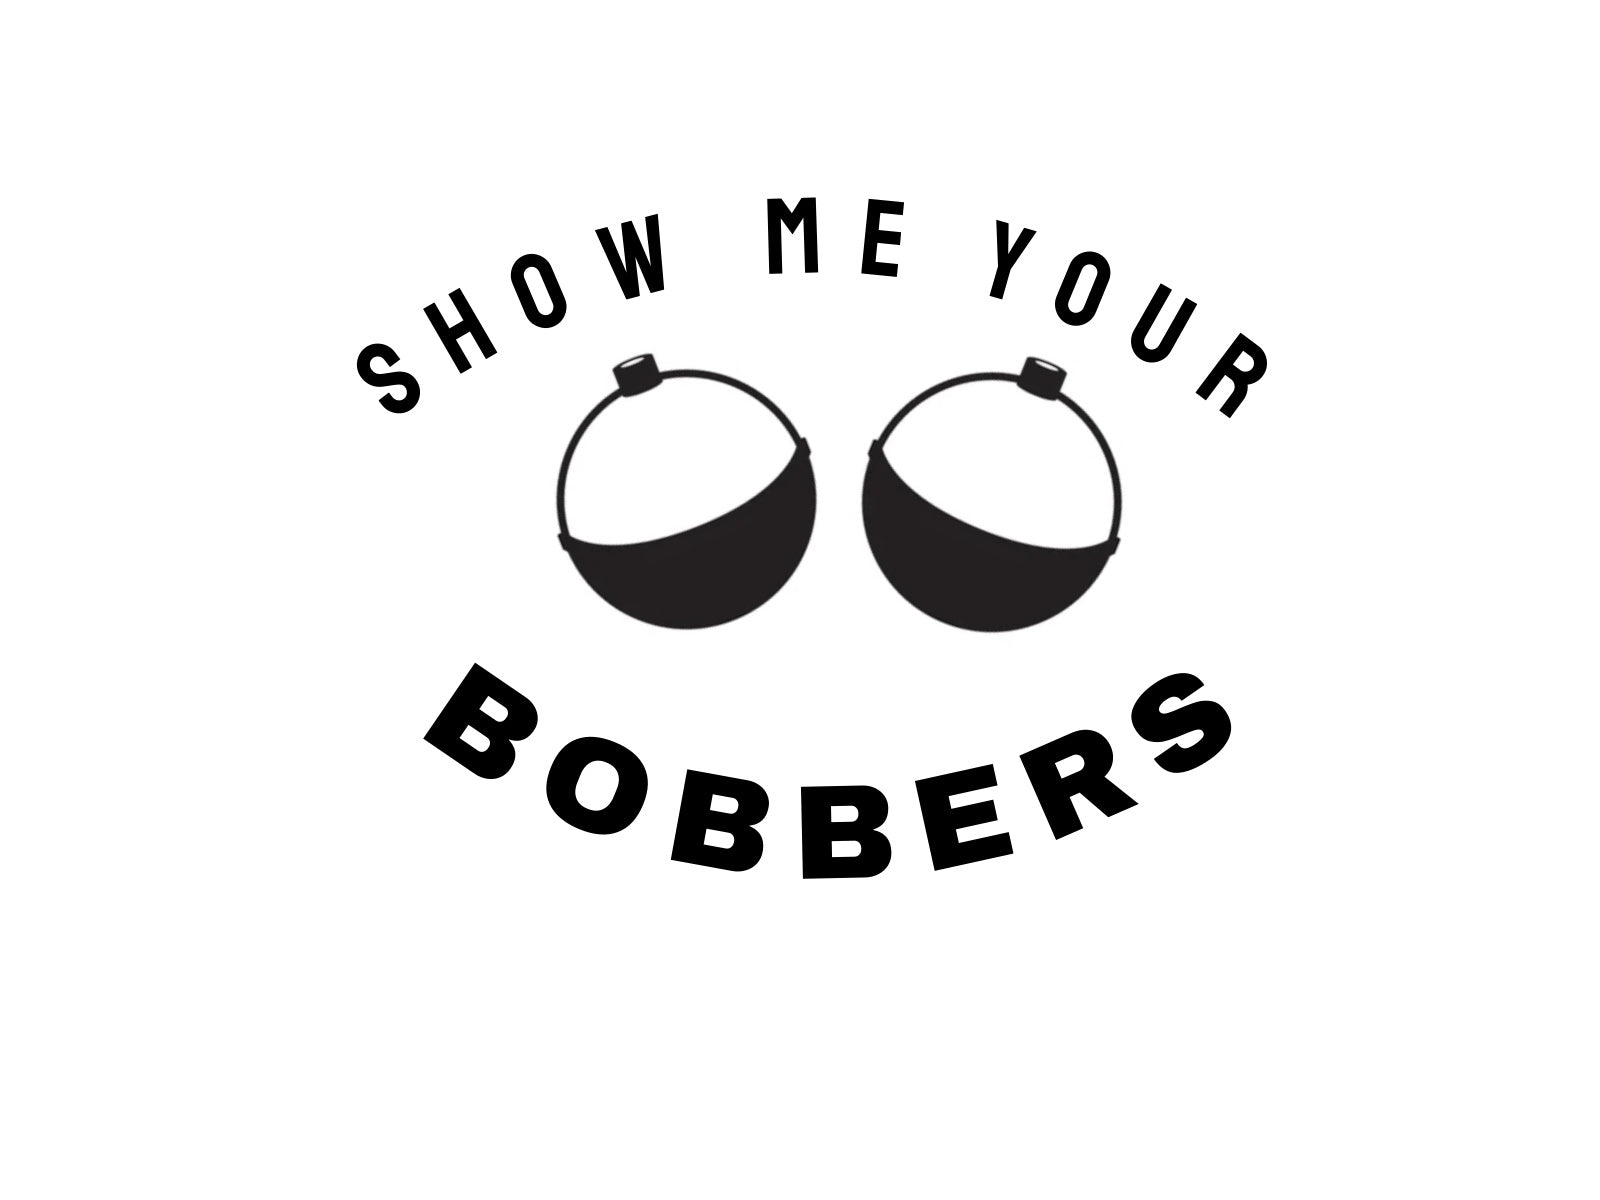 Show Me Your Bobbers